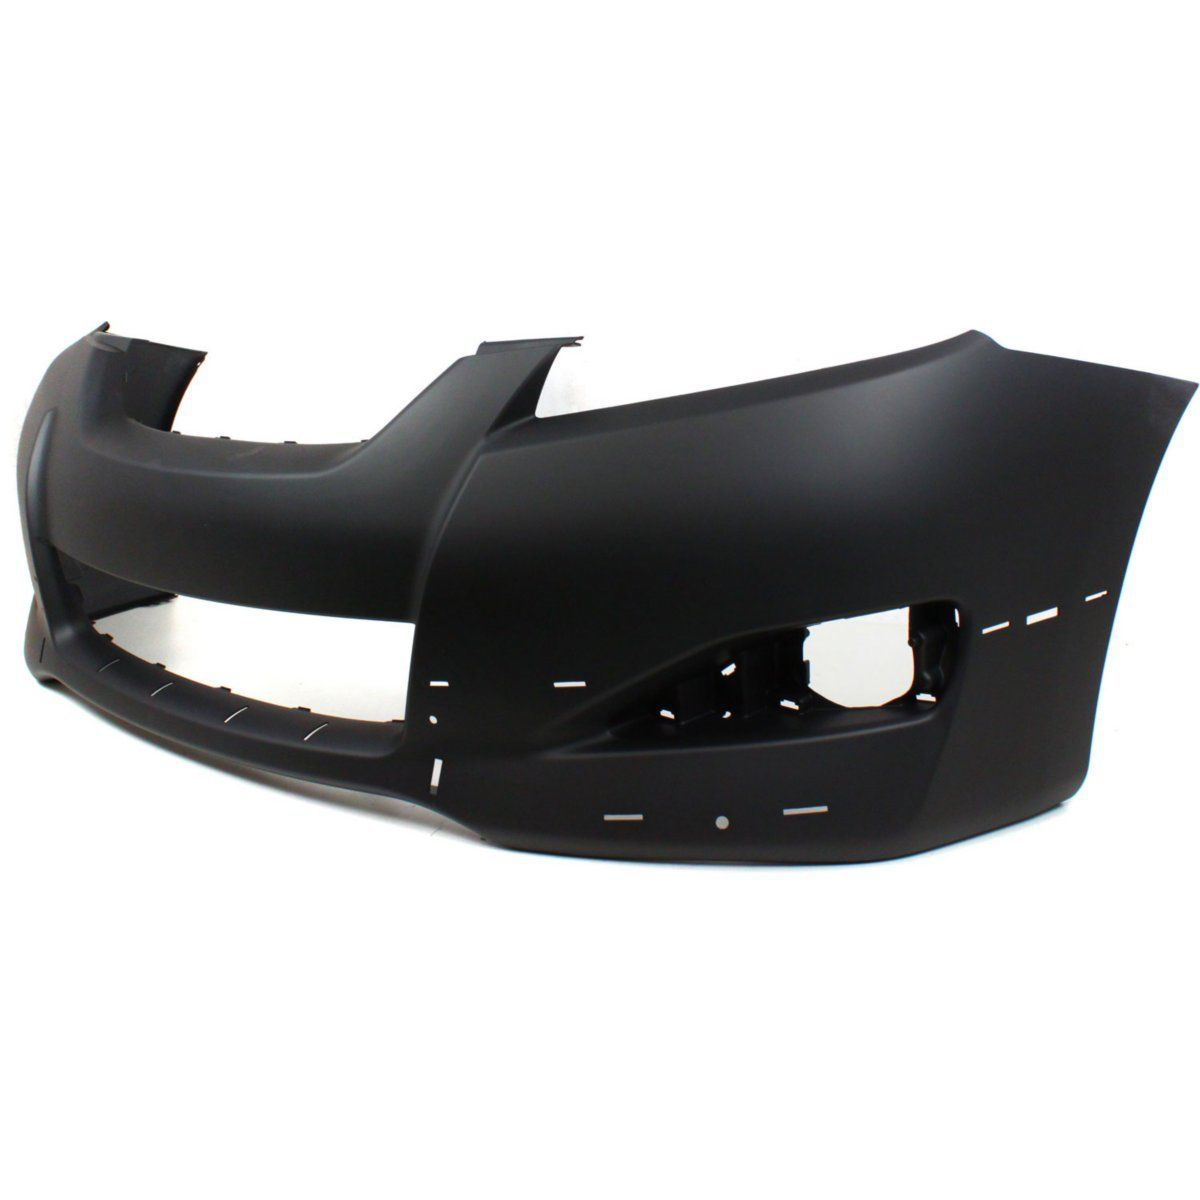 2009-2010 TOYOTA MATRIX Front Bumper Cover w/ Spoiler Holes Painted to Match